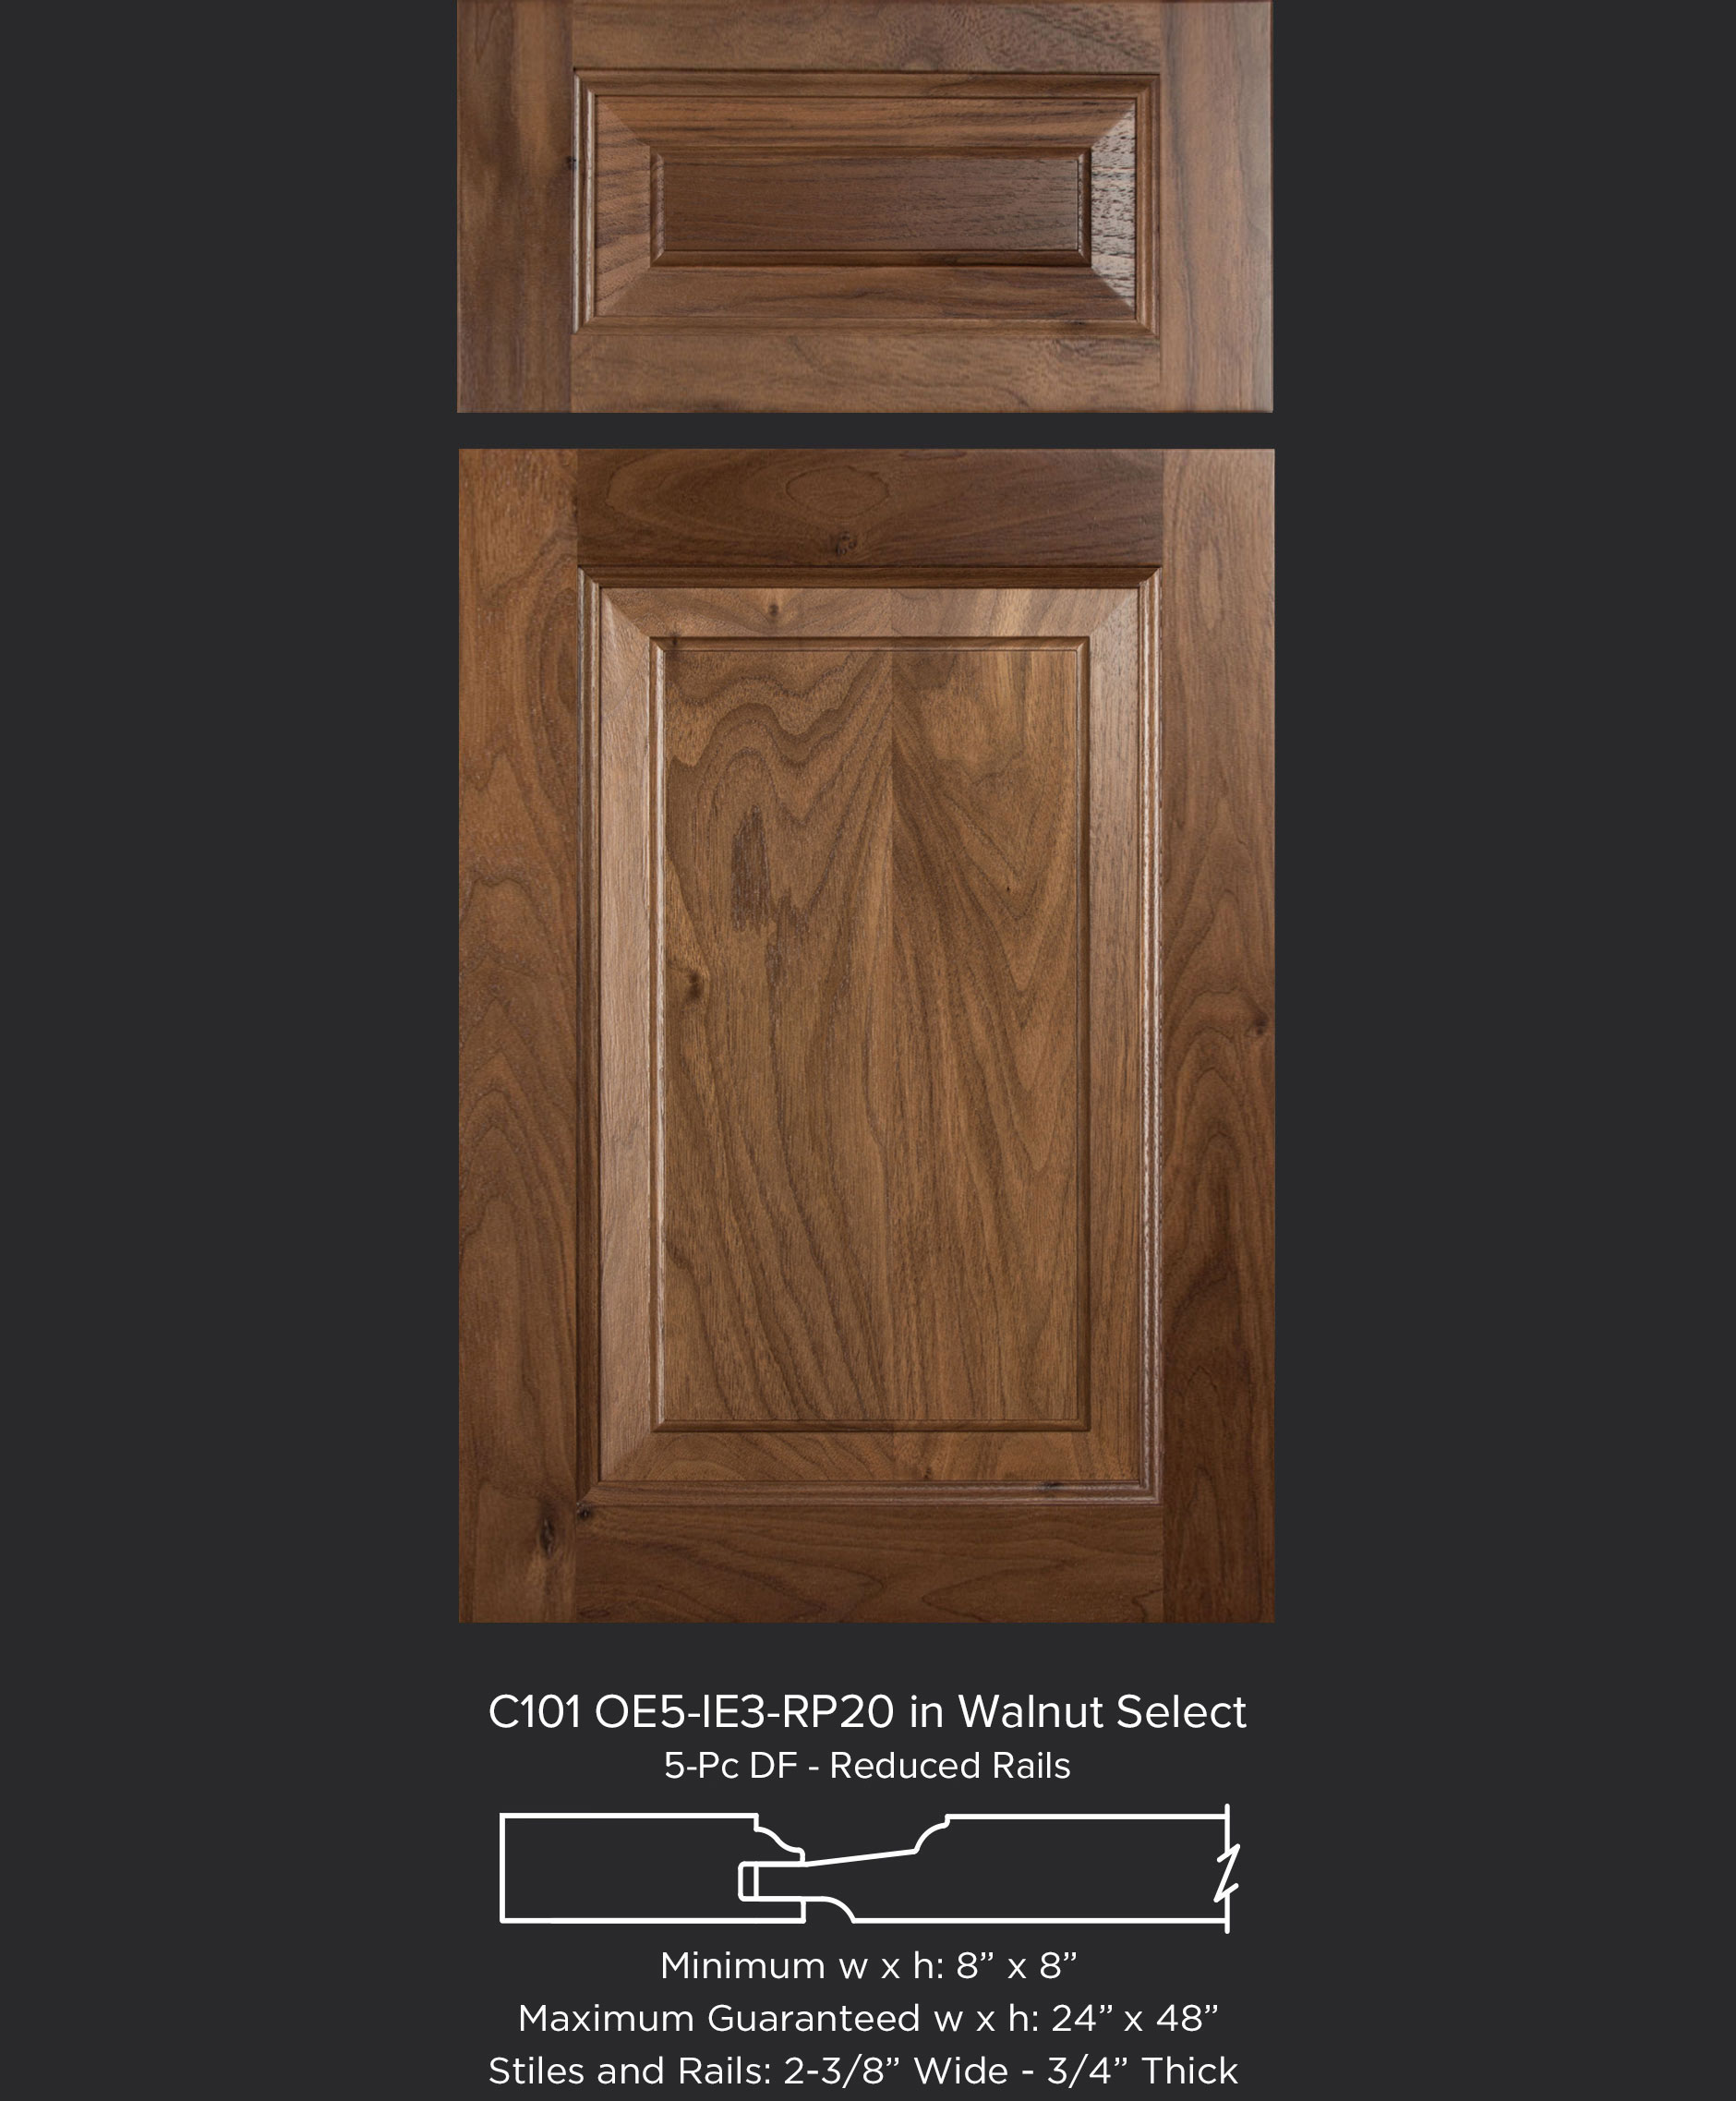 Cope and Stick Cabinet Door 2-3/8" stiles and rails OE5-IE3-RP20 in Walnut Select with reduced rail drawer fronts